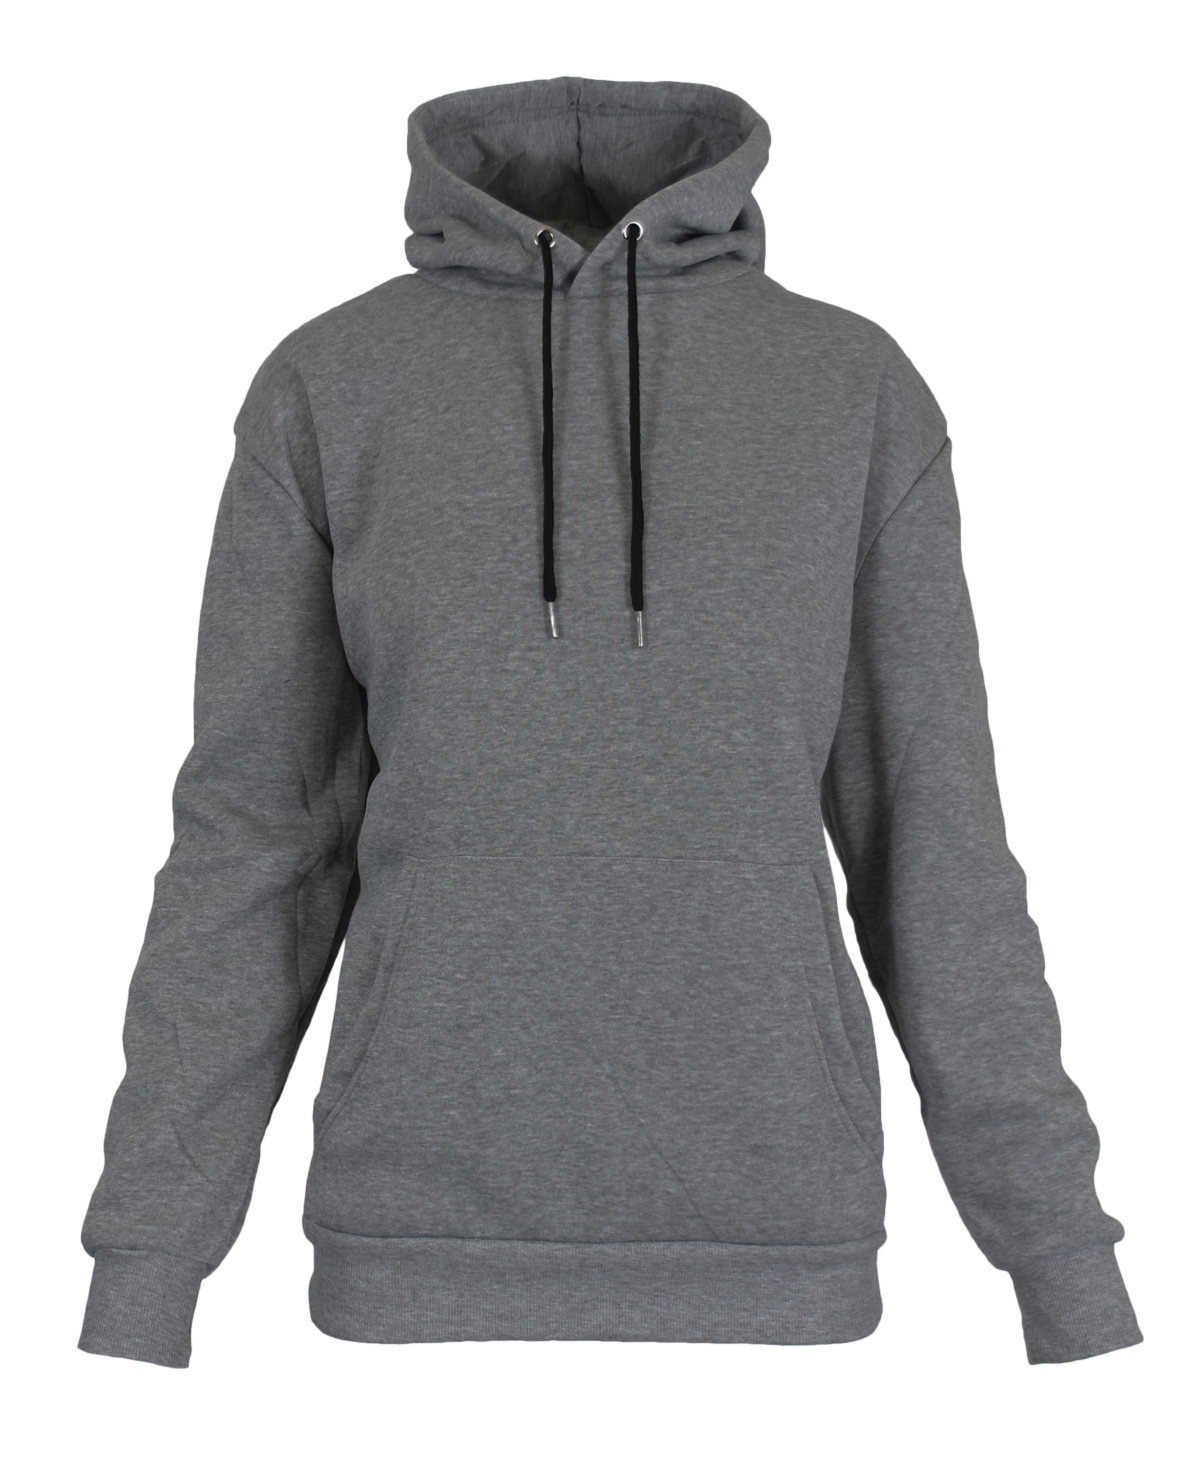 Galaxy By Harvic Women's Heavyweight Loose Fit Fleece Lined Pullover Hoodie In Charcoal